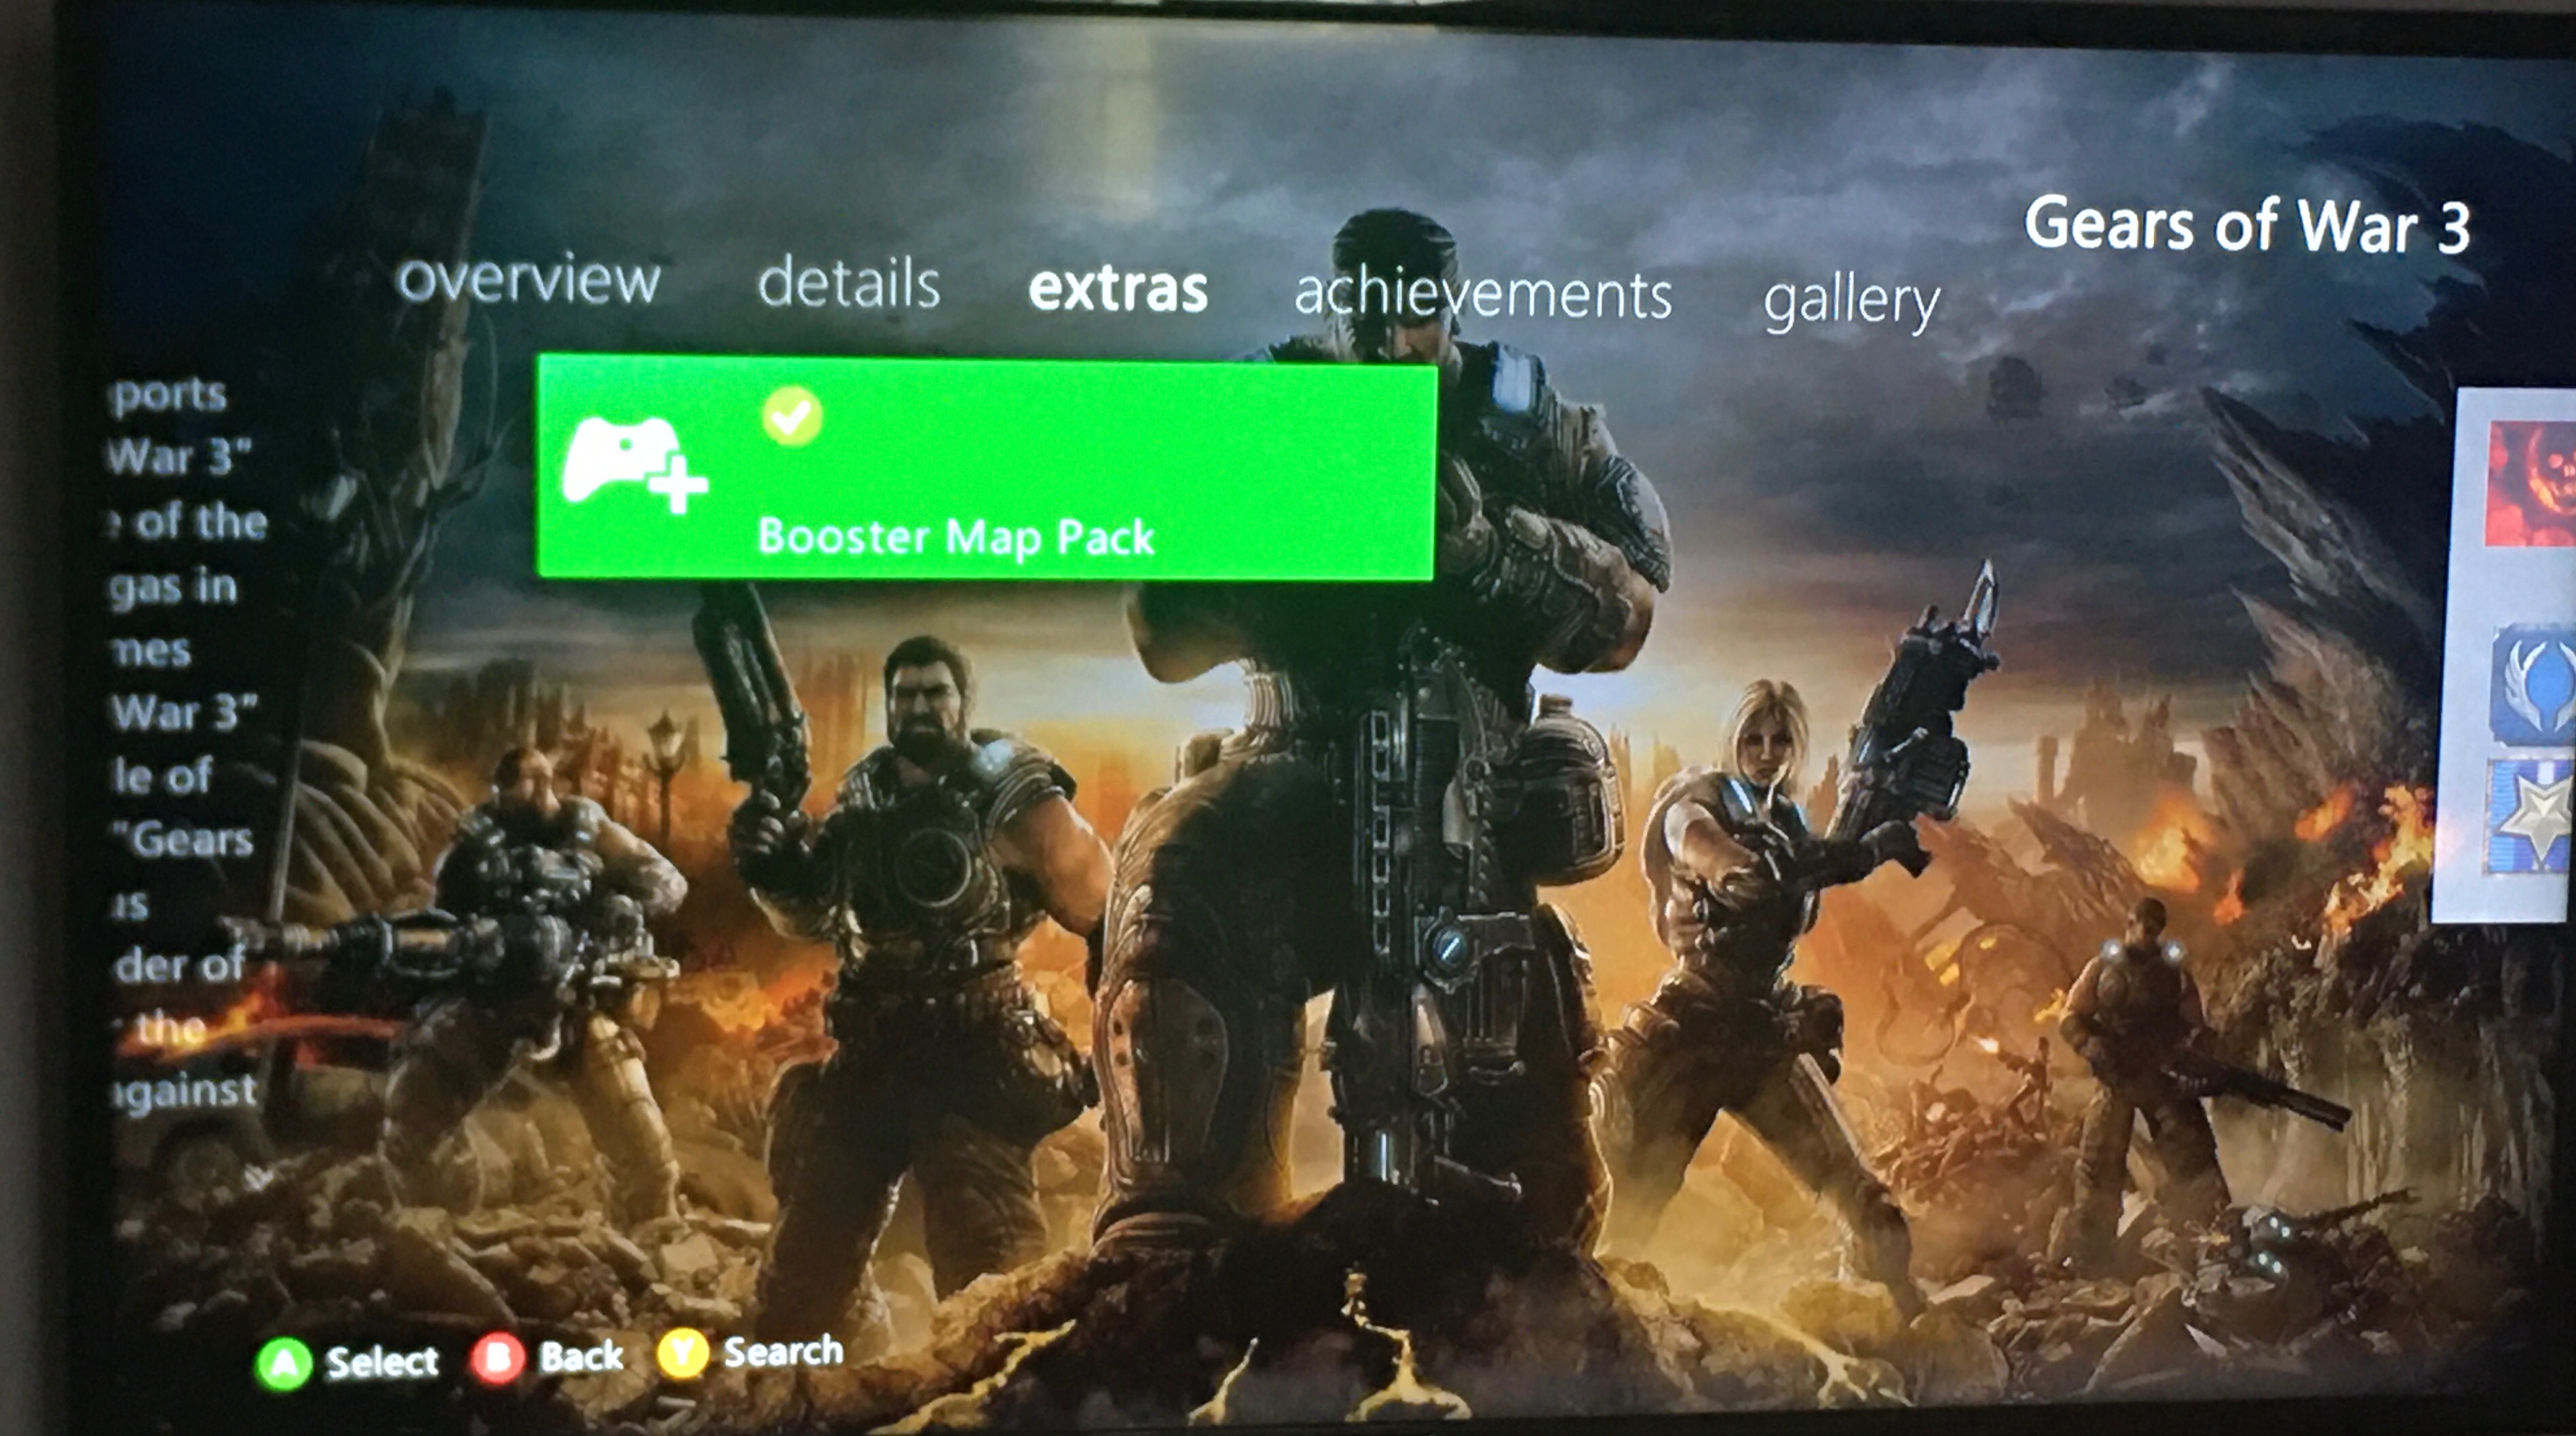 Installing DLC for Any Game Xbox JTAG/RGH 